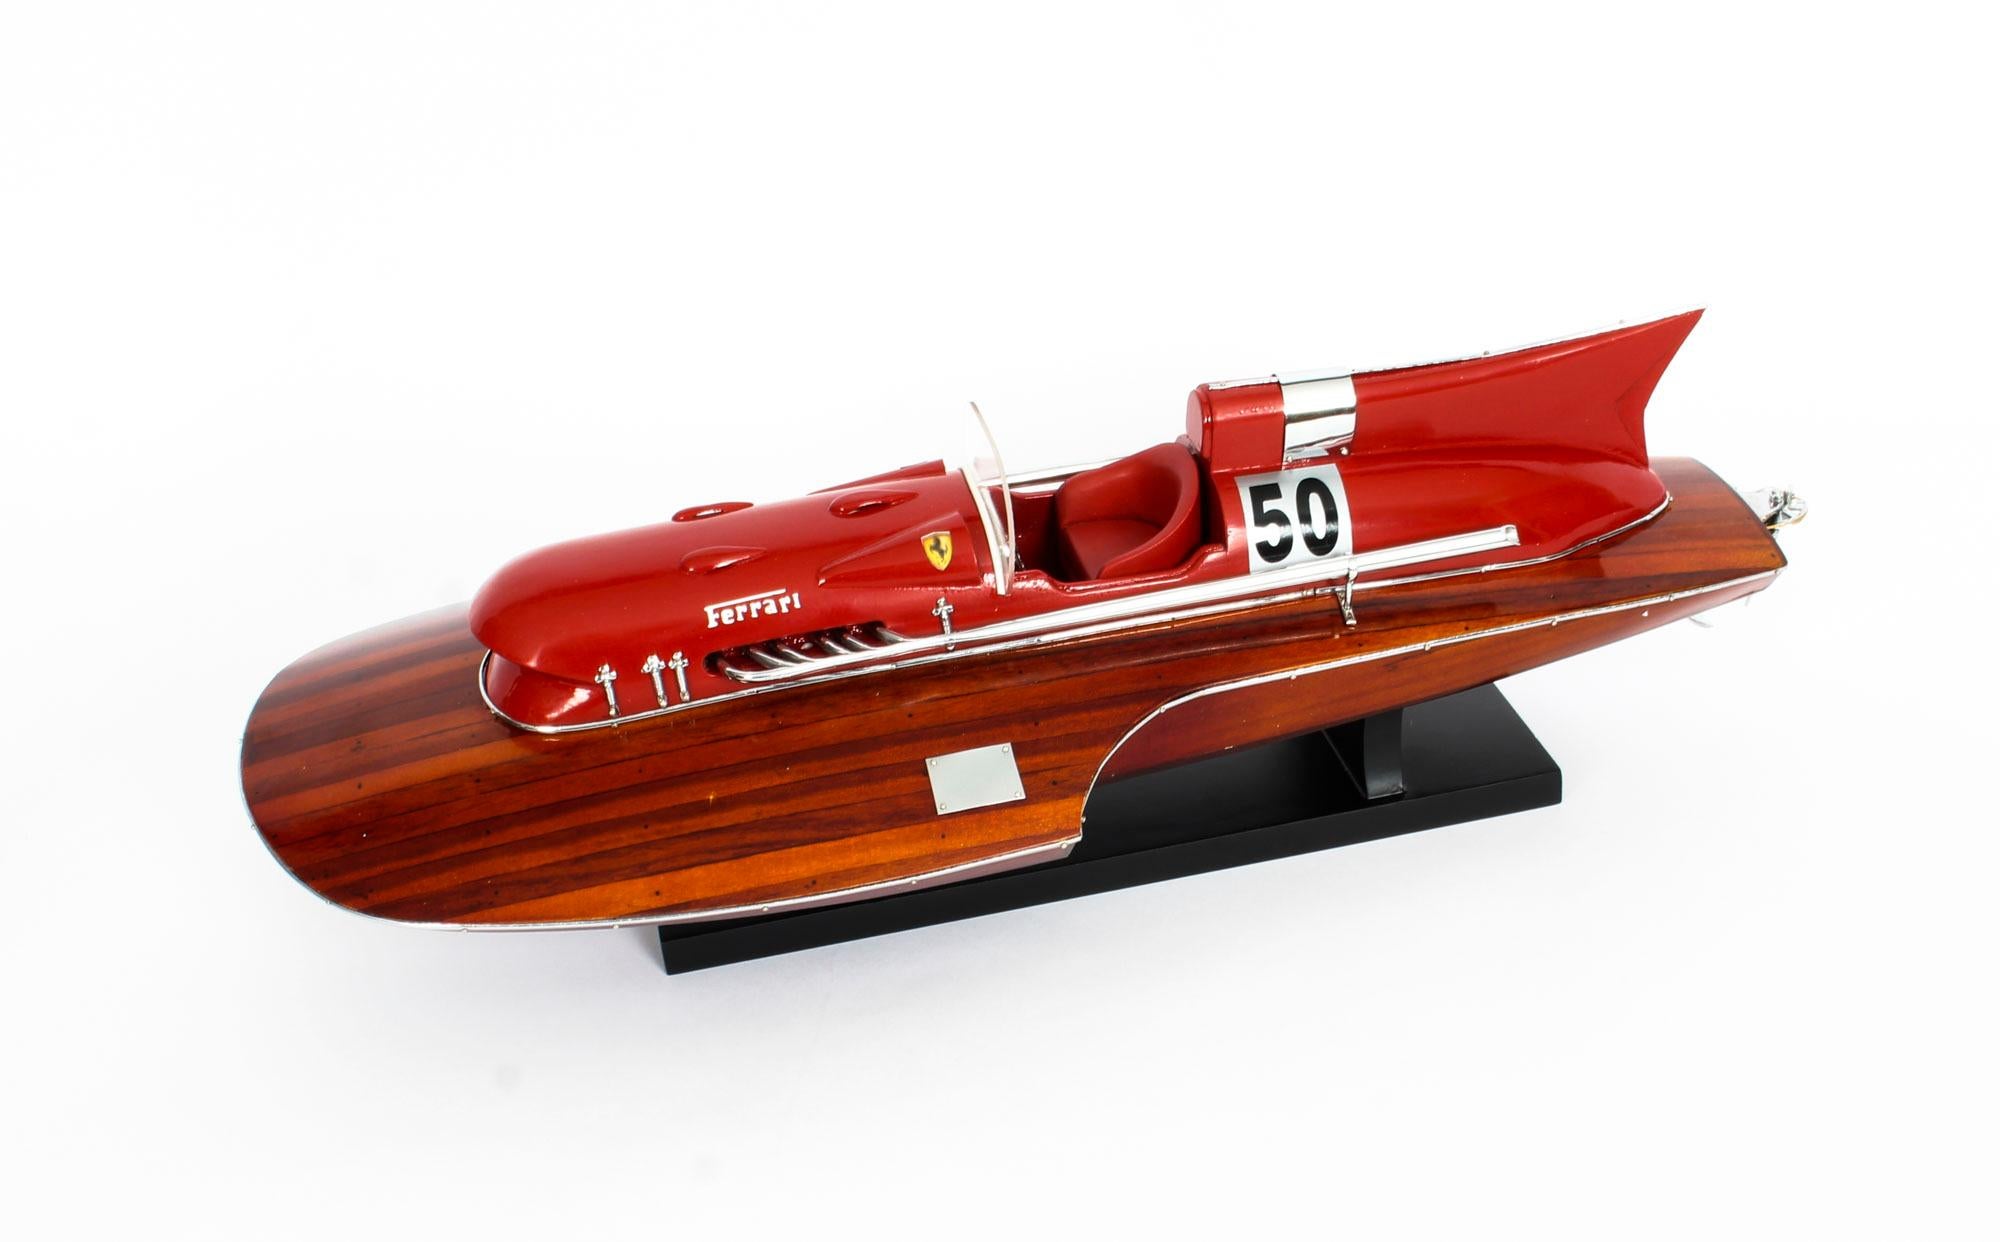 This is a superb Vintage model of a Ferrari Hydroplane 1954. Its cars are adored on all corners of the globe and are seen as the ultimate status symbol for the rich and powerful.
But as these incredible pictures show, Ferrari is not just a talented